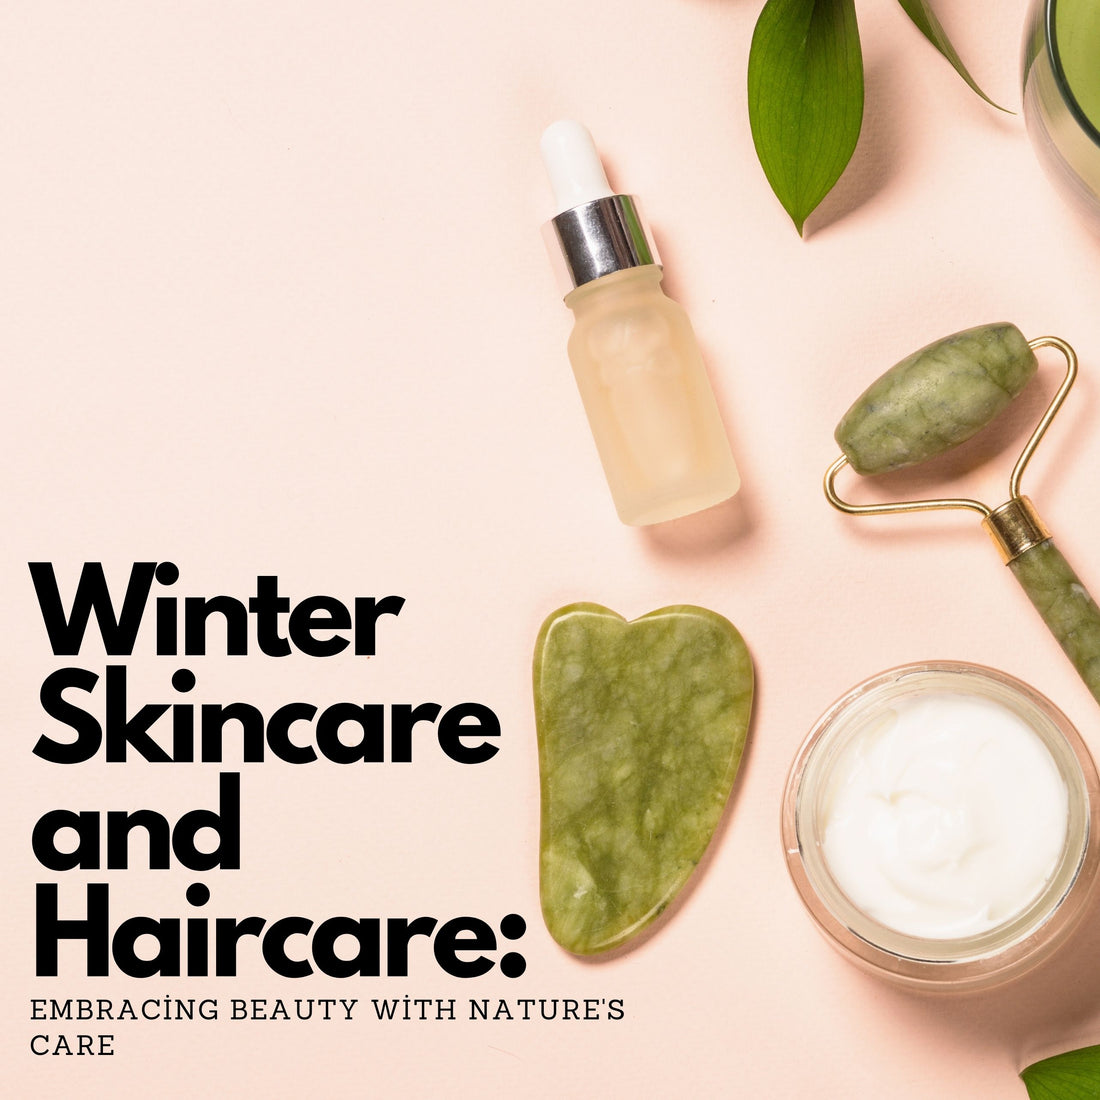 Winter Skincare and Haircare: Embracing Beauty with Nature's Care